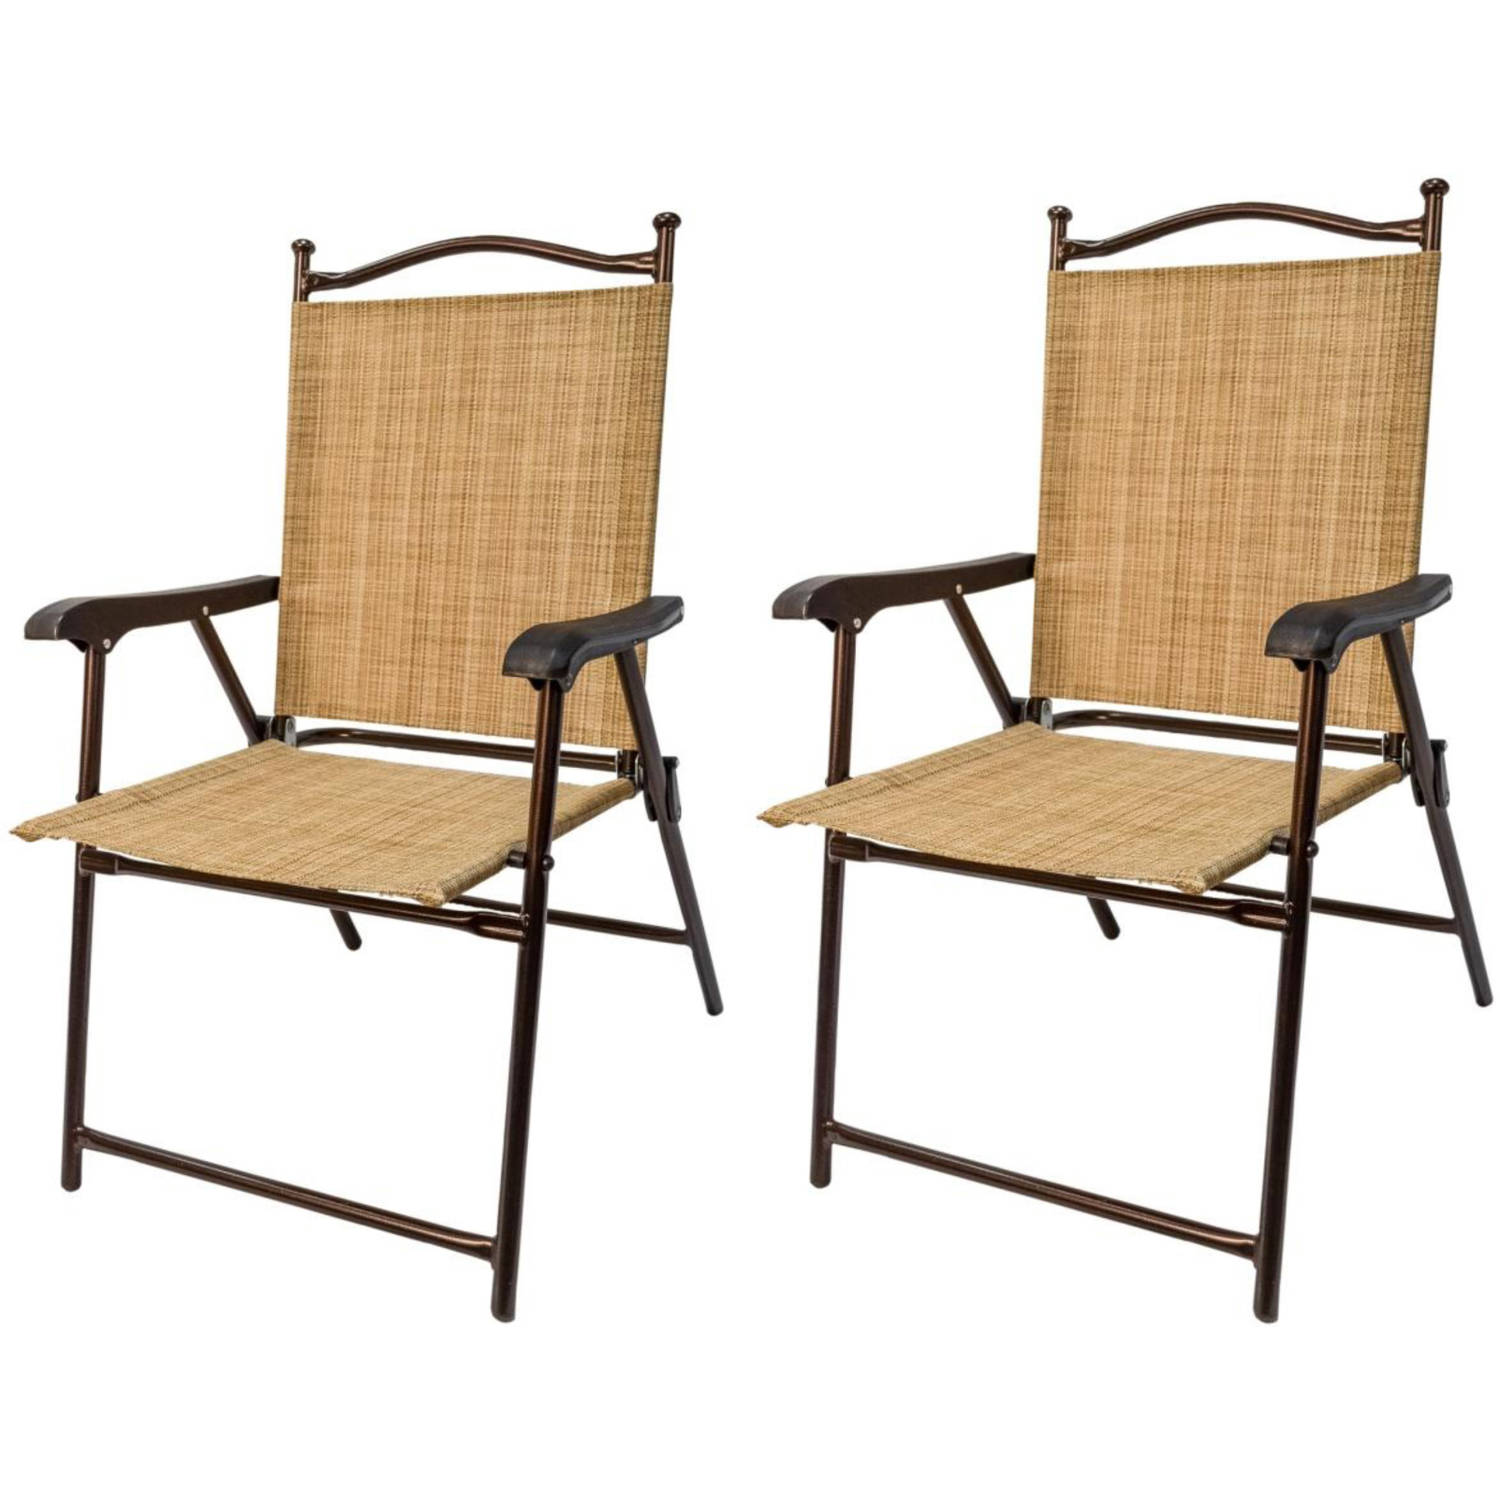 lawn chairs sling black outdoor chairs, bamboo, set of 2 QXMTHIN